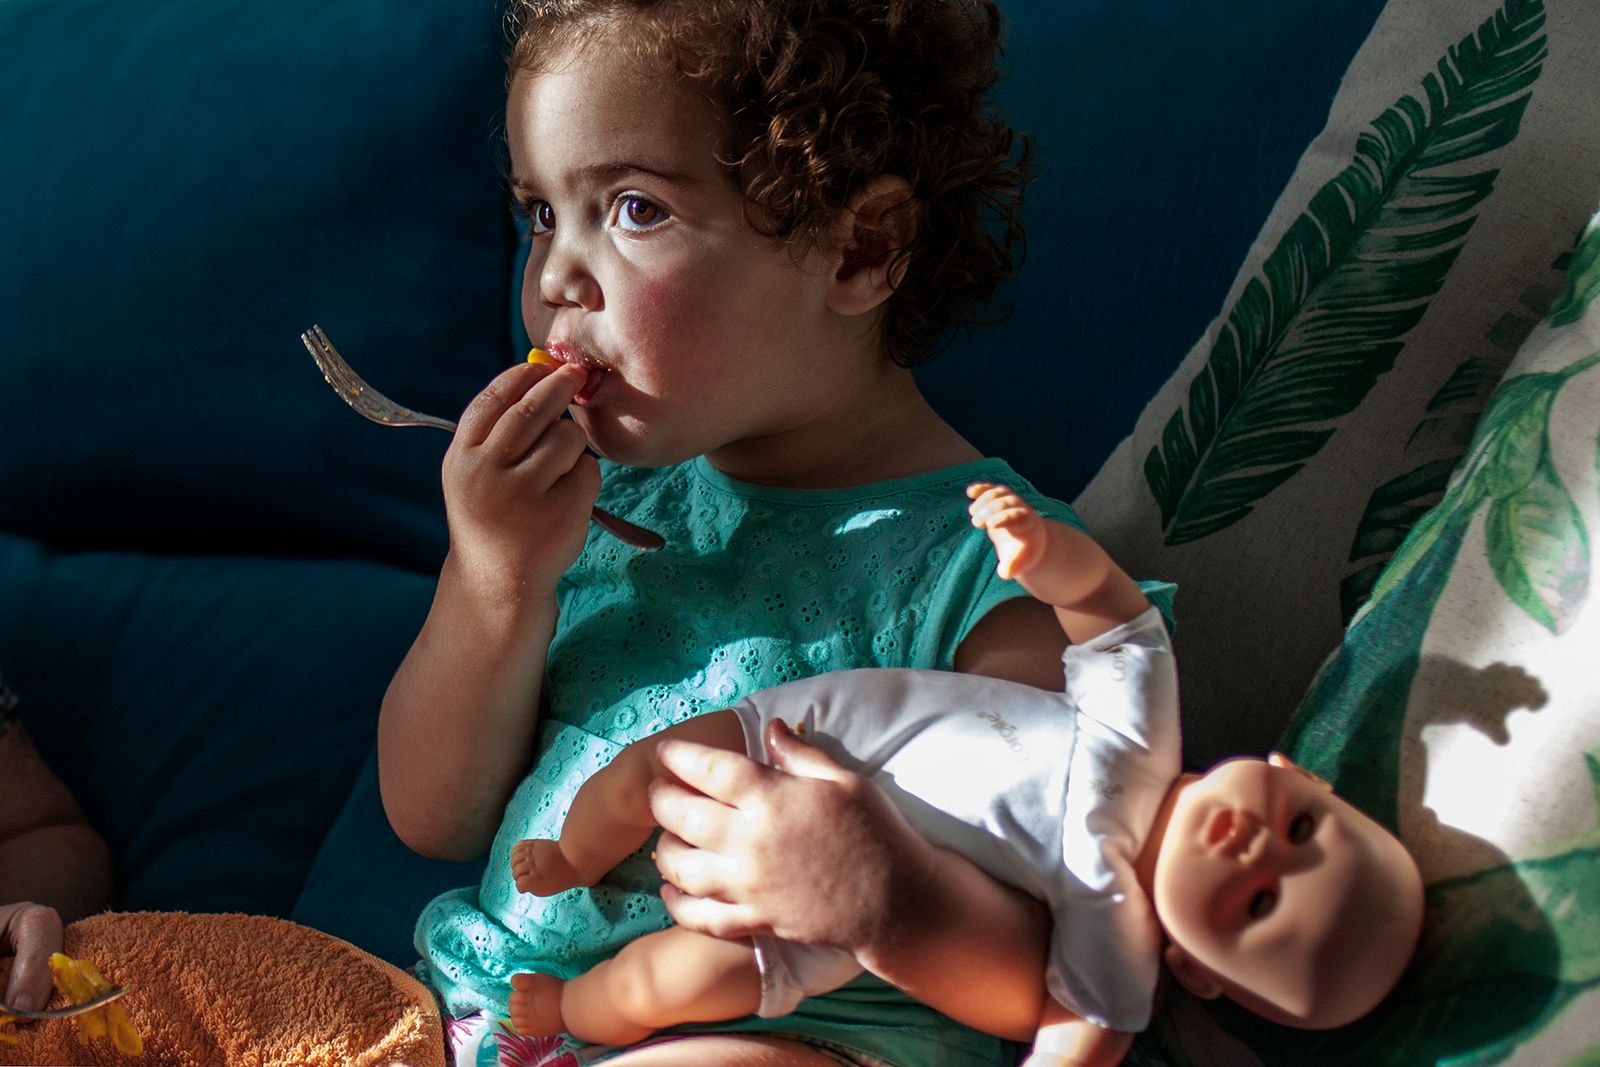 © Séverine Sajous - Zelie and her doll. The idea of ​​motherhood and its role at the societal level has been instilled since childhood